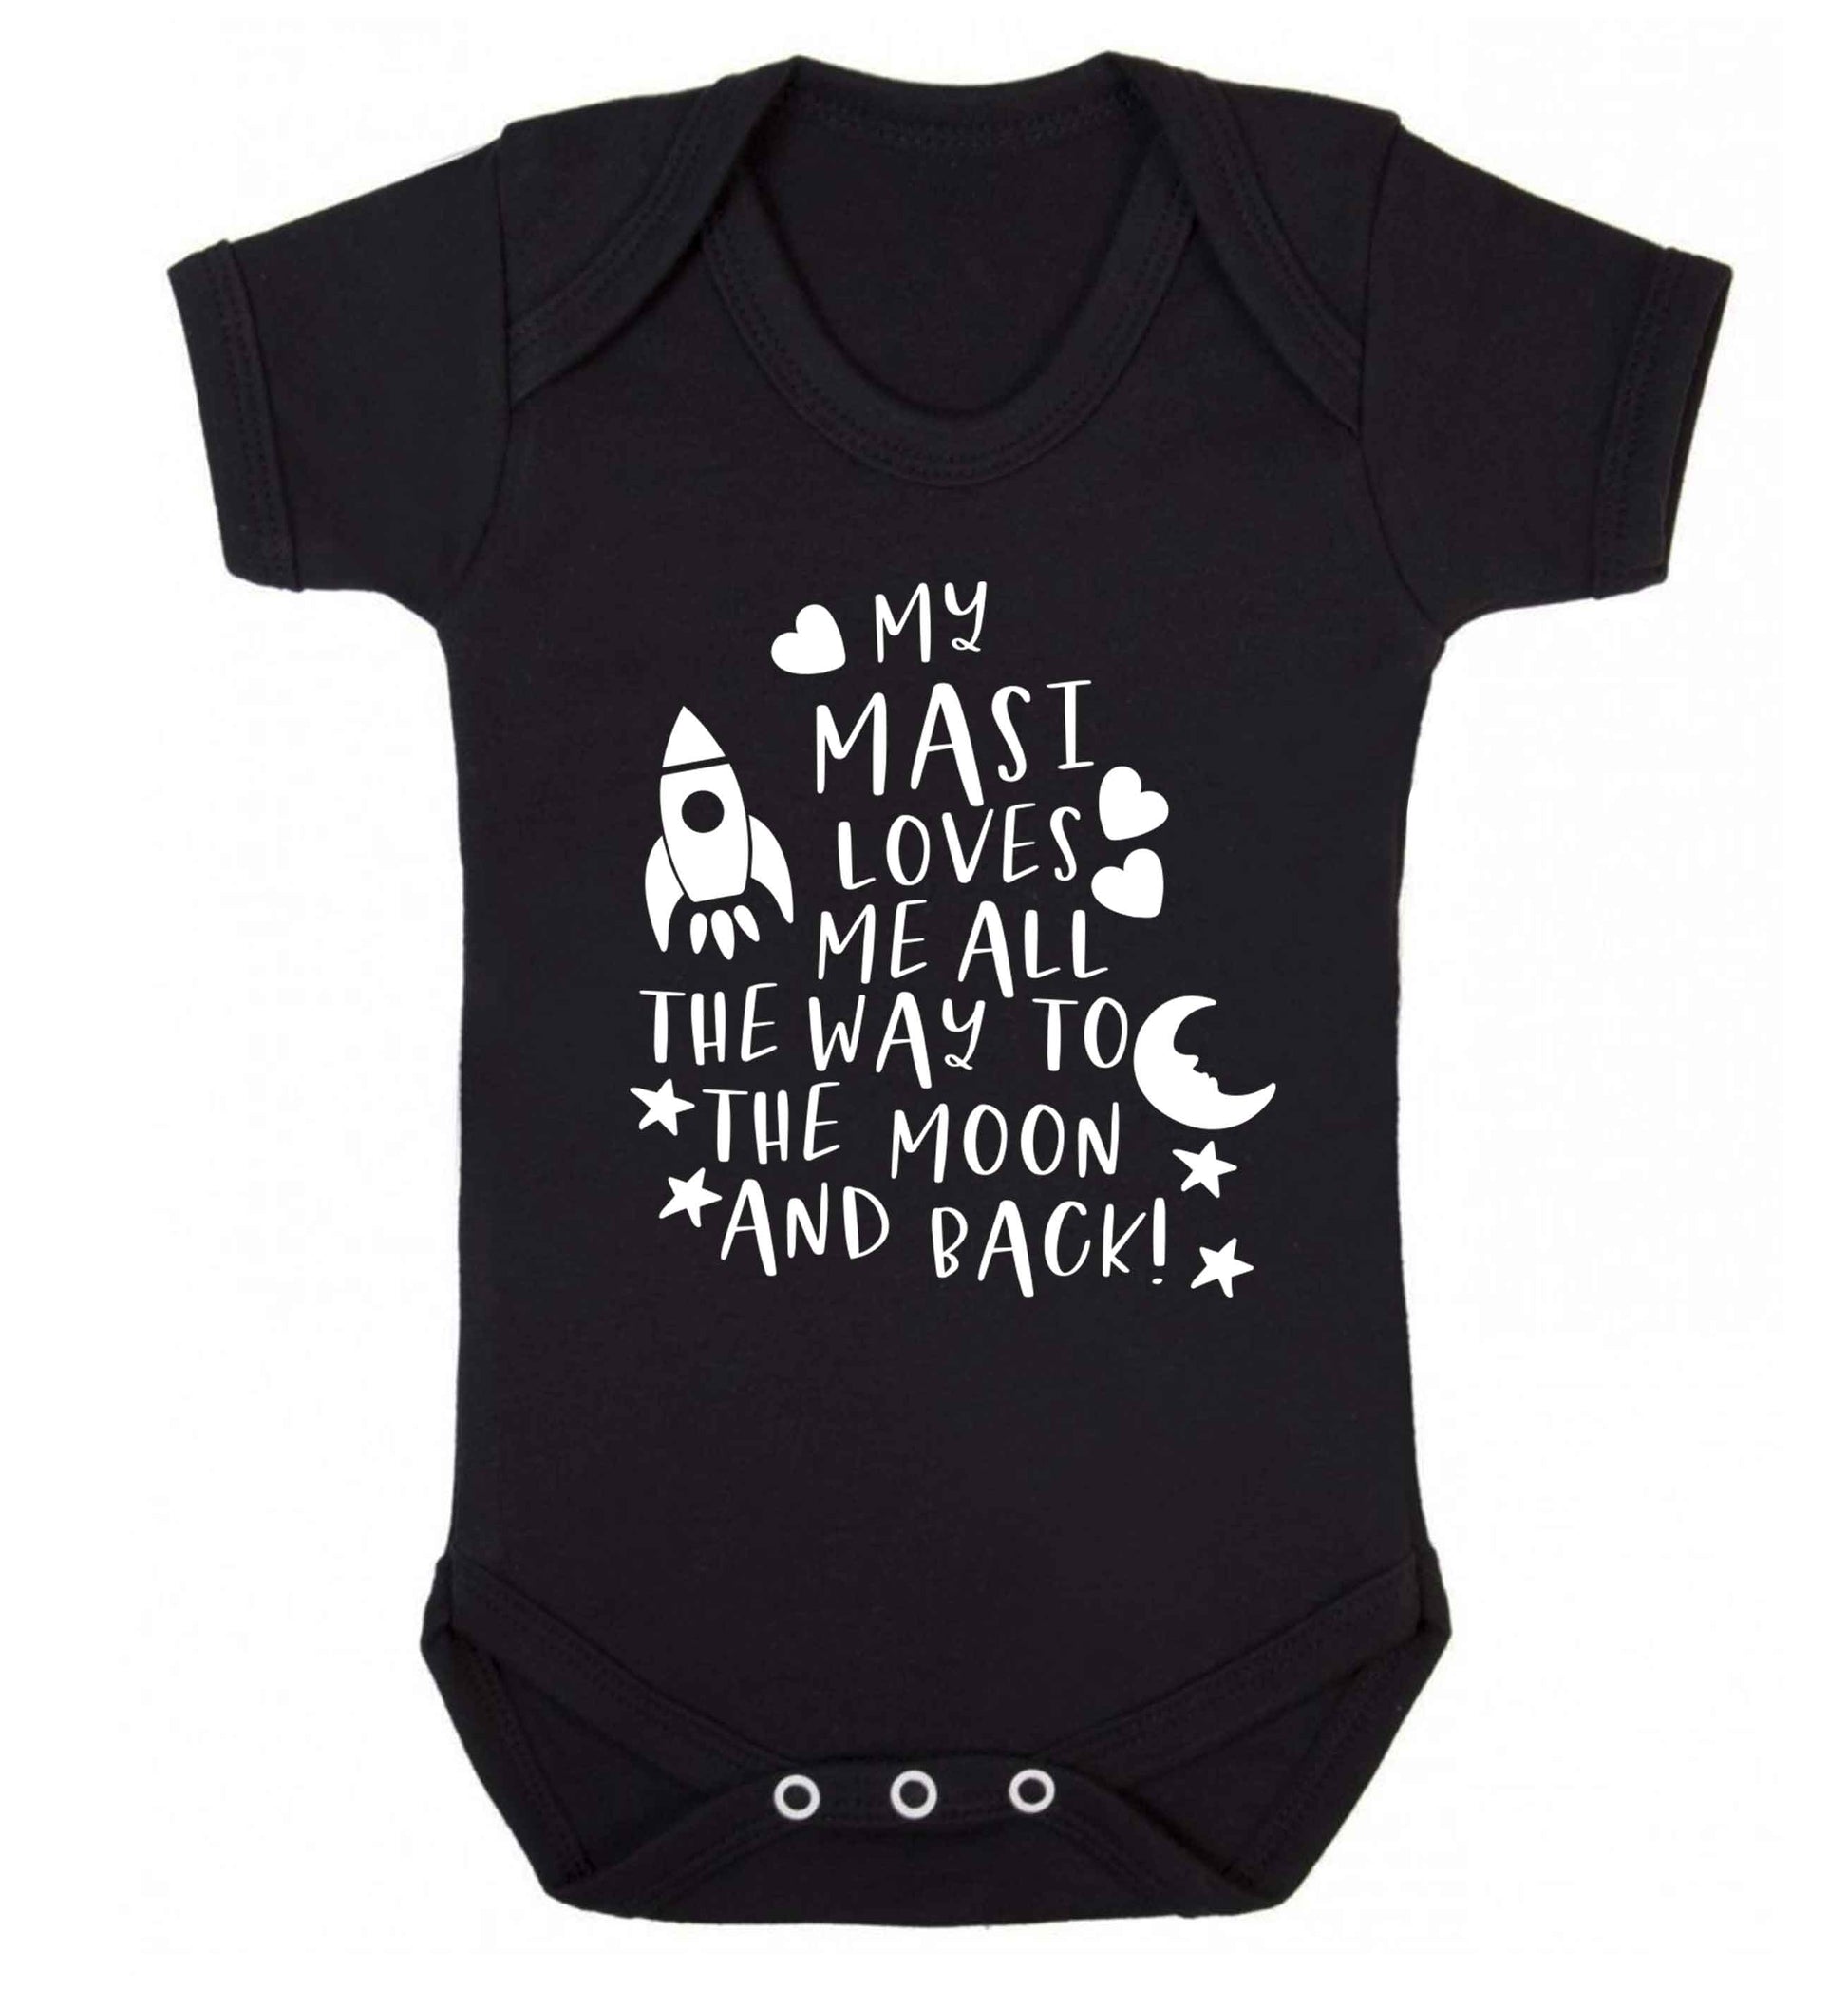 My masi loves me all the way to the moon and back Baby Vest black 18-24 months